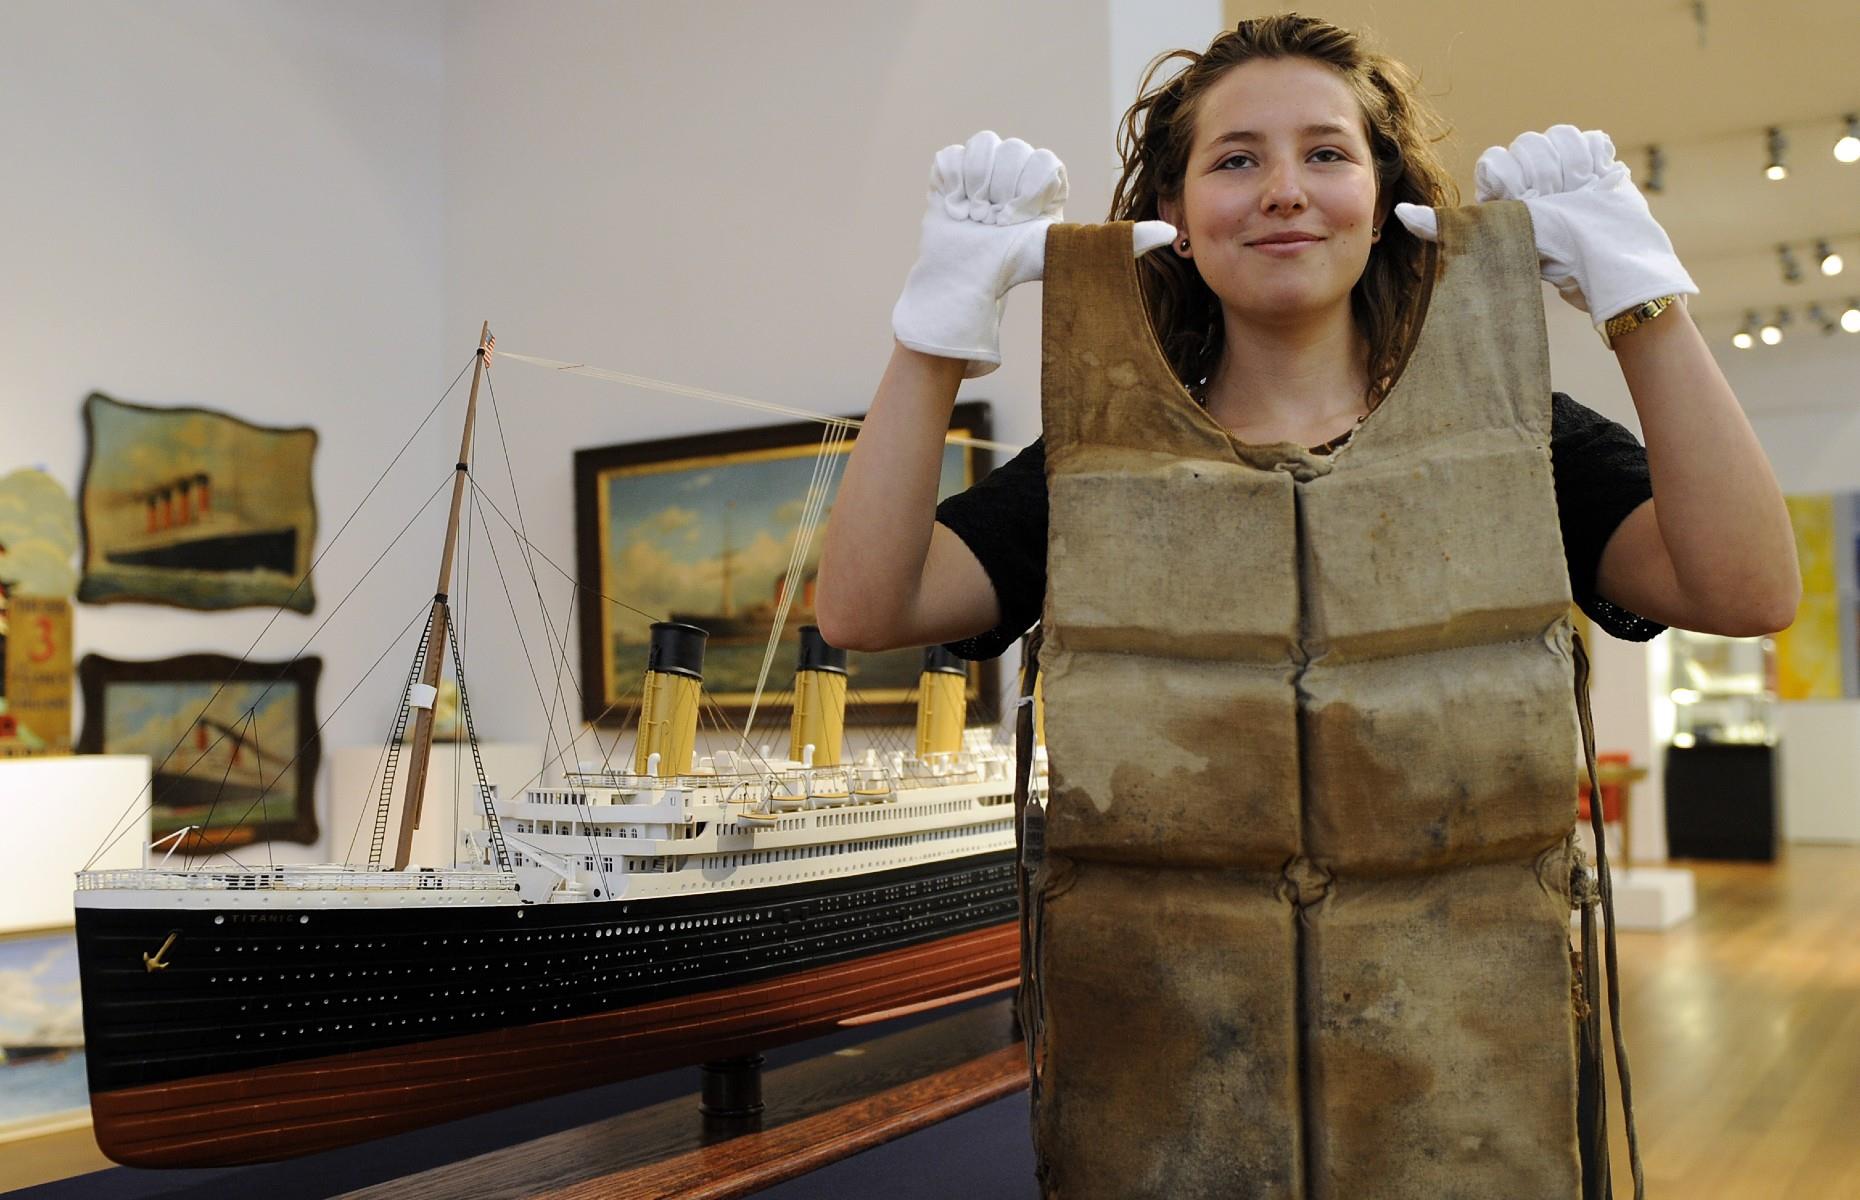 <p>There were around 3,500 lifejackets onboard the Titanic, all stuffed with cork as was typical of floatation devices at the time. The impractical filling was so solid that many survivors and victims of the disaster were found with broken jaws as a result of the impact of jumping into the water. This jacket is believed to have been found by a farmer on the shoreline of Halifax, Newfoundland in 1912 and appeared to be unused as the shoulder straps were still in place. One of just six known to exist, it sold for $68,500 at auction in 2008.</p>